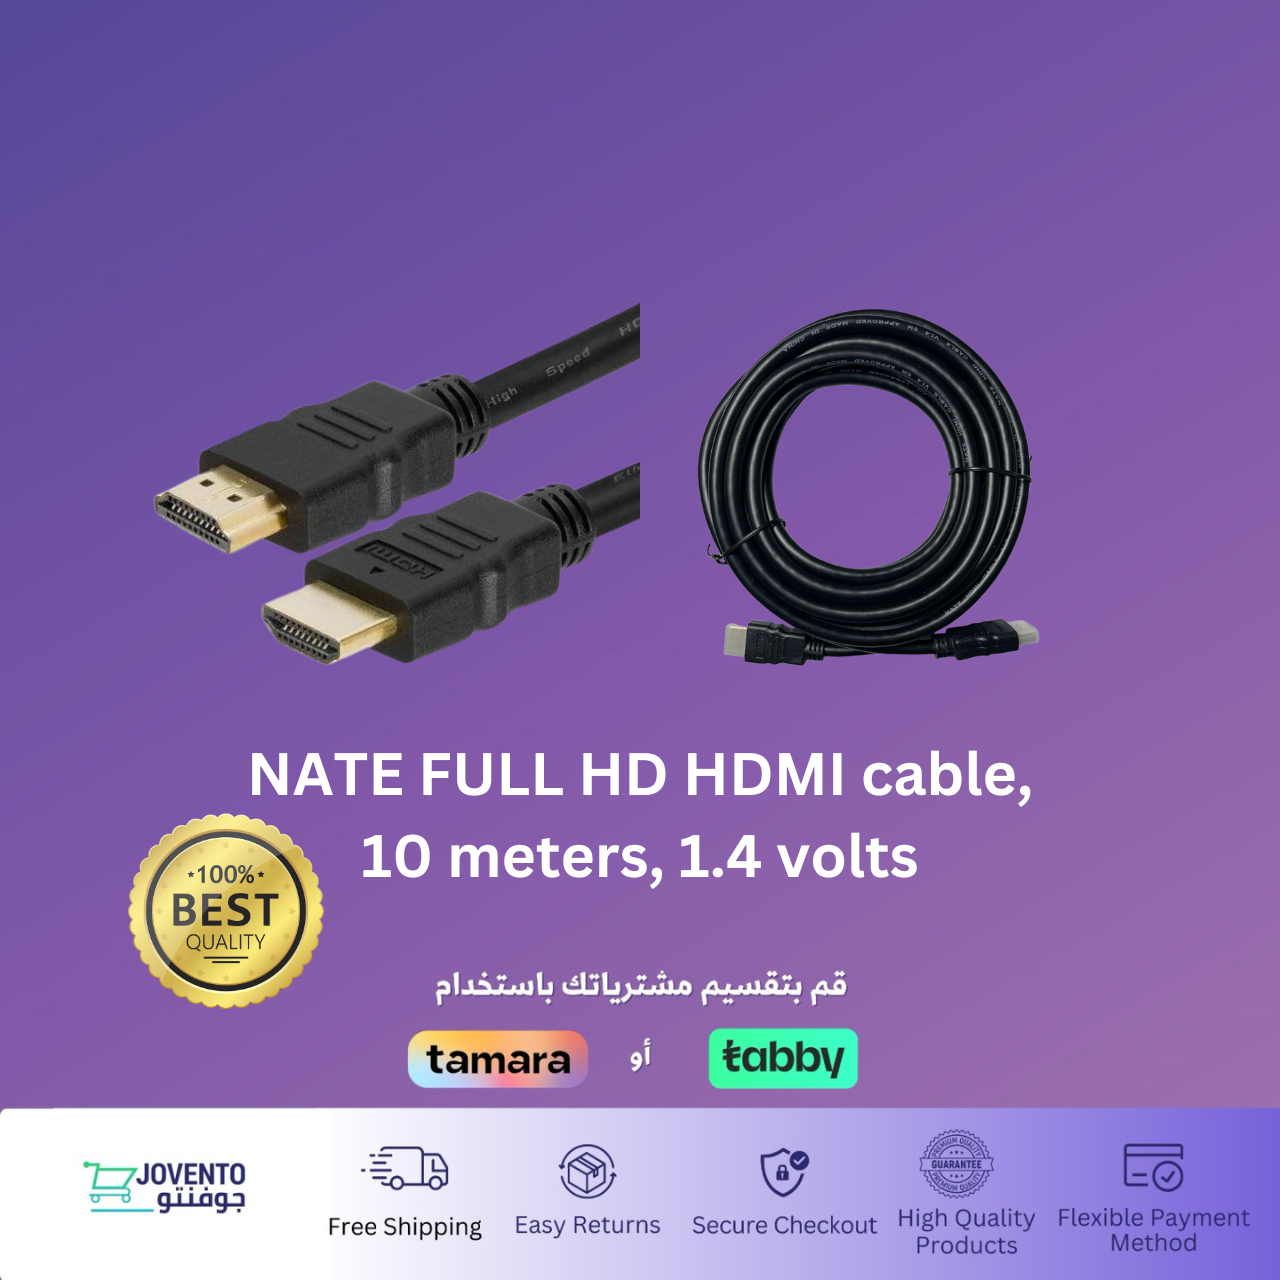 NATE 10M HDMI Cable -  Support Full HD 1.4V